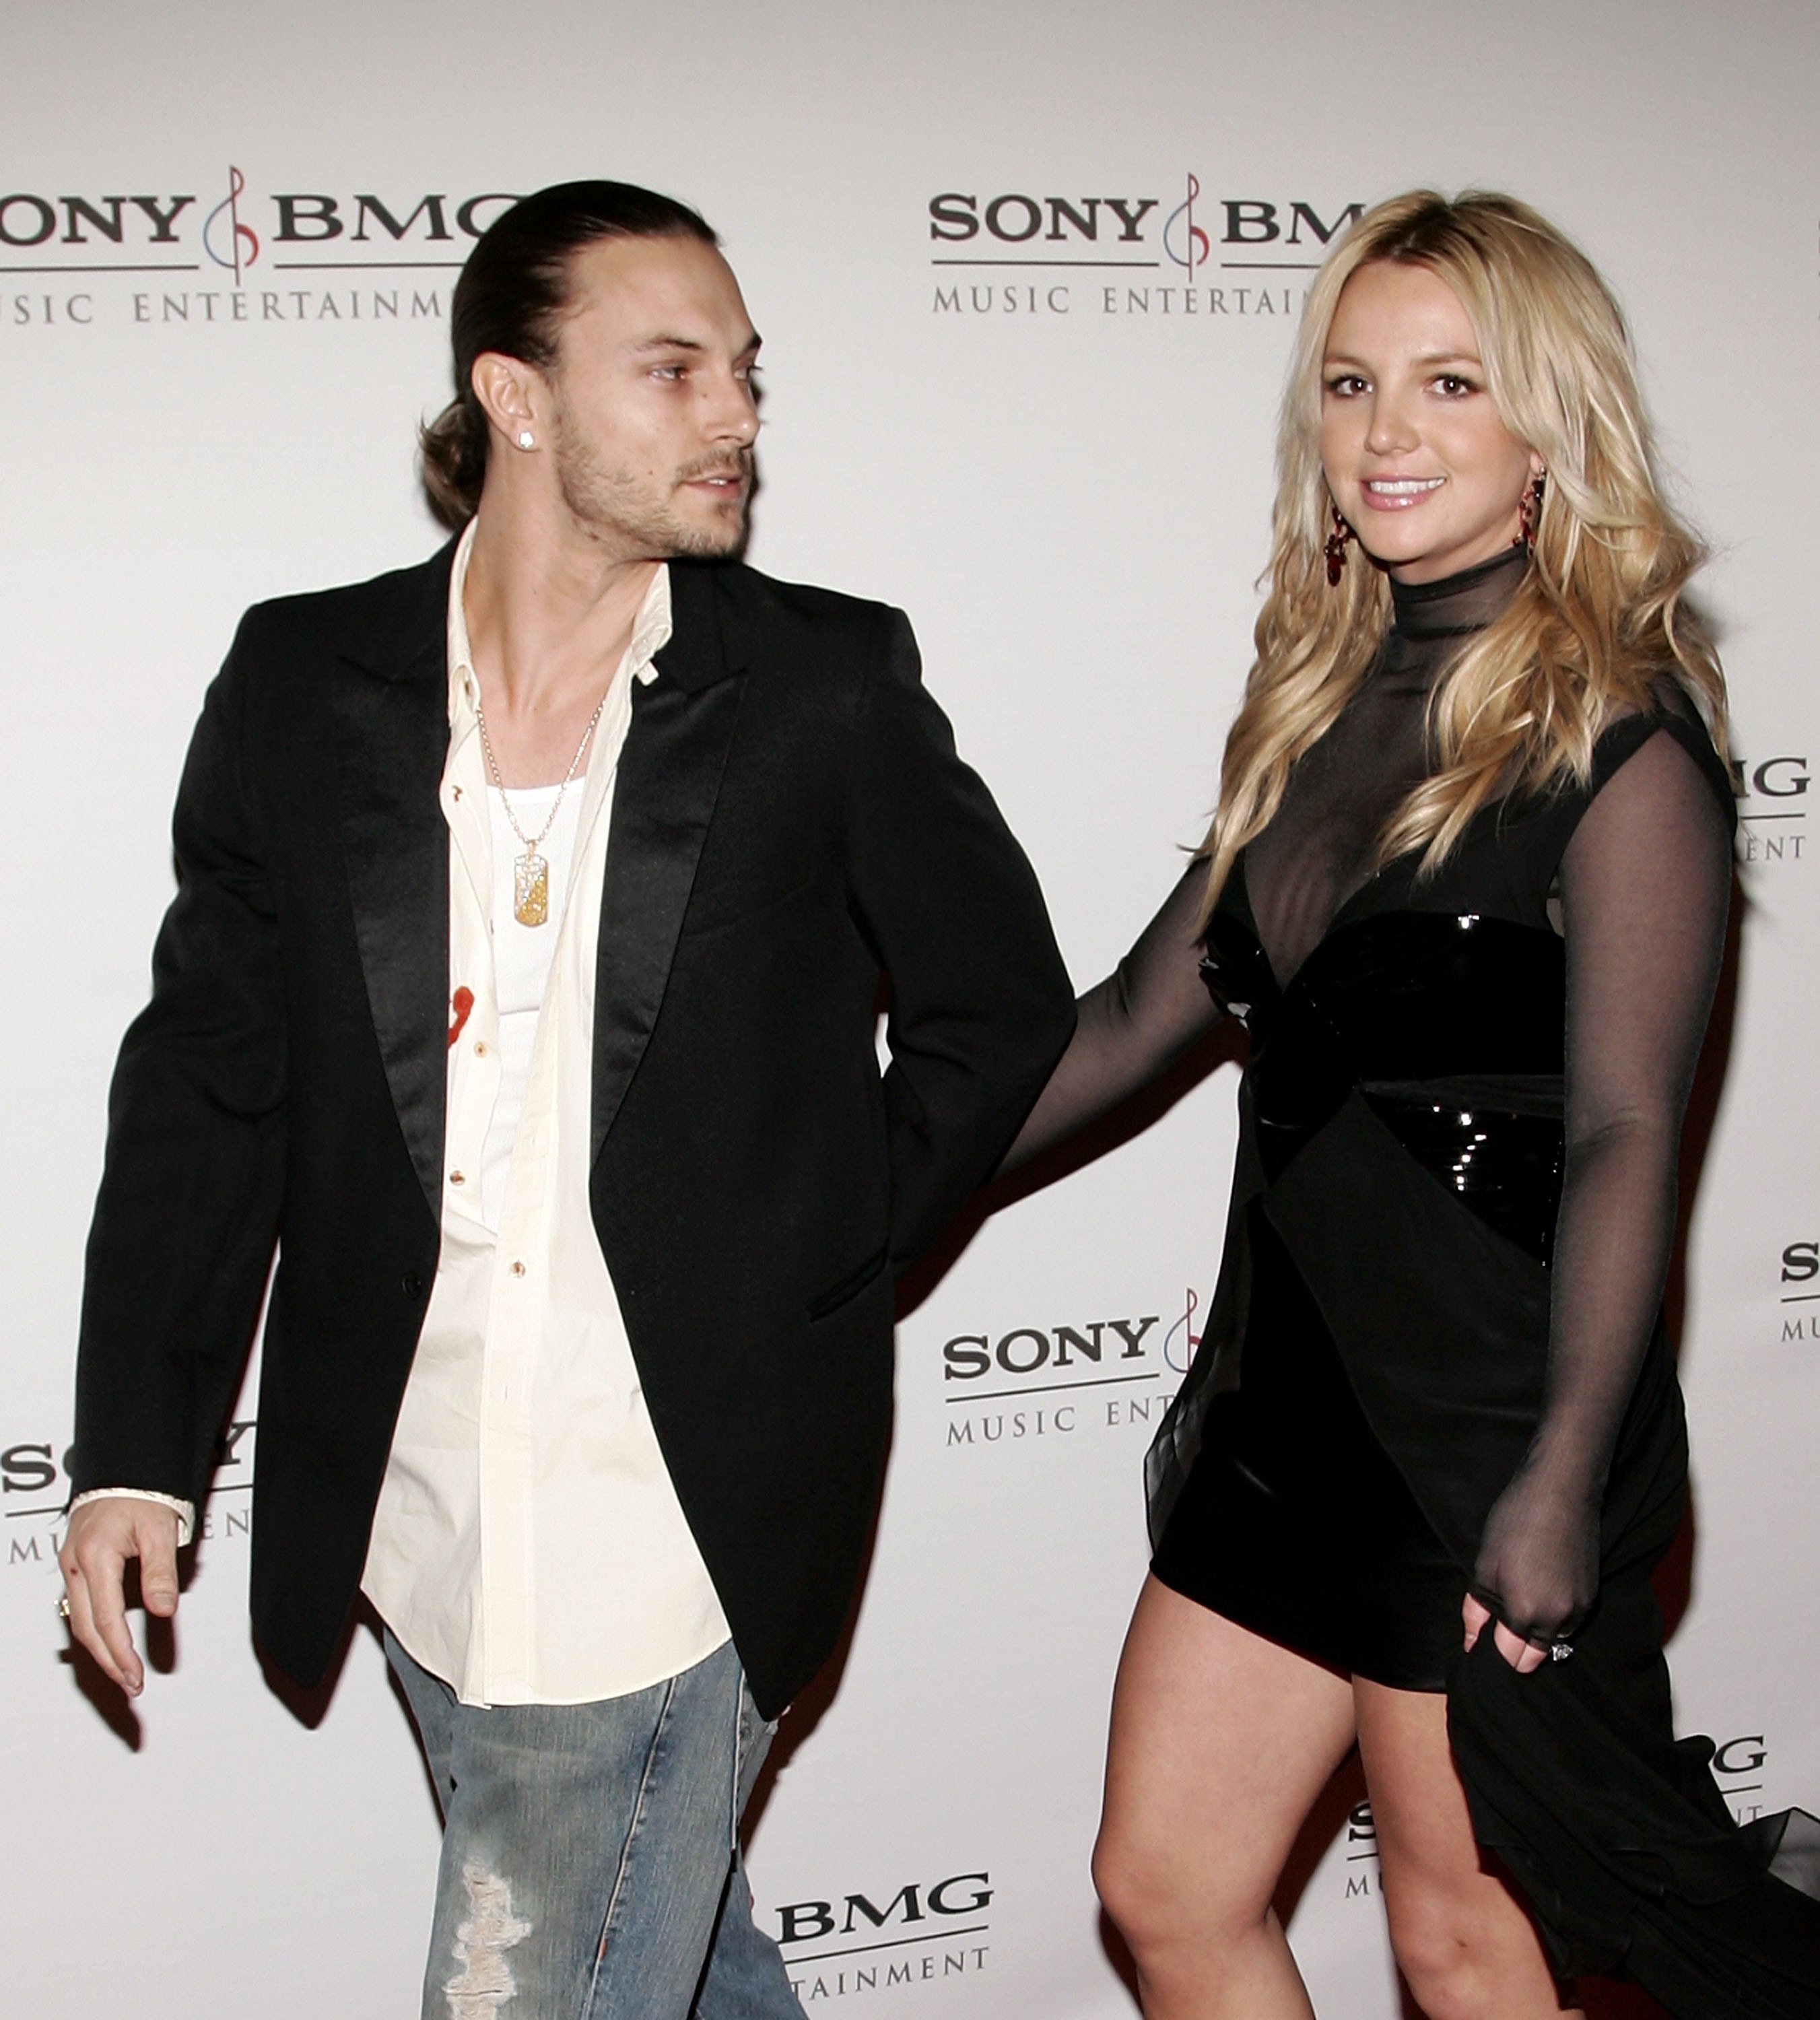 Britney Spears and husband Kevin Federline arrive at the SONY BMG Grammy Party held at The Hollywood Roosevelt Hotel on February 8, 2006 in Hollywood, California. | Photo: GettyImages